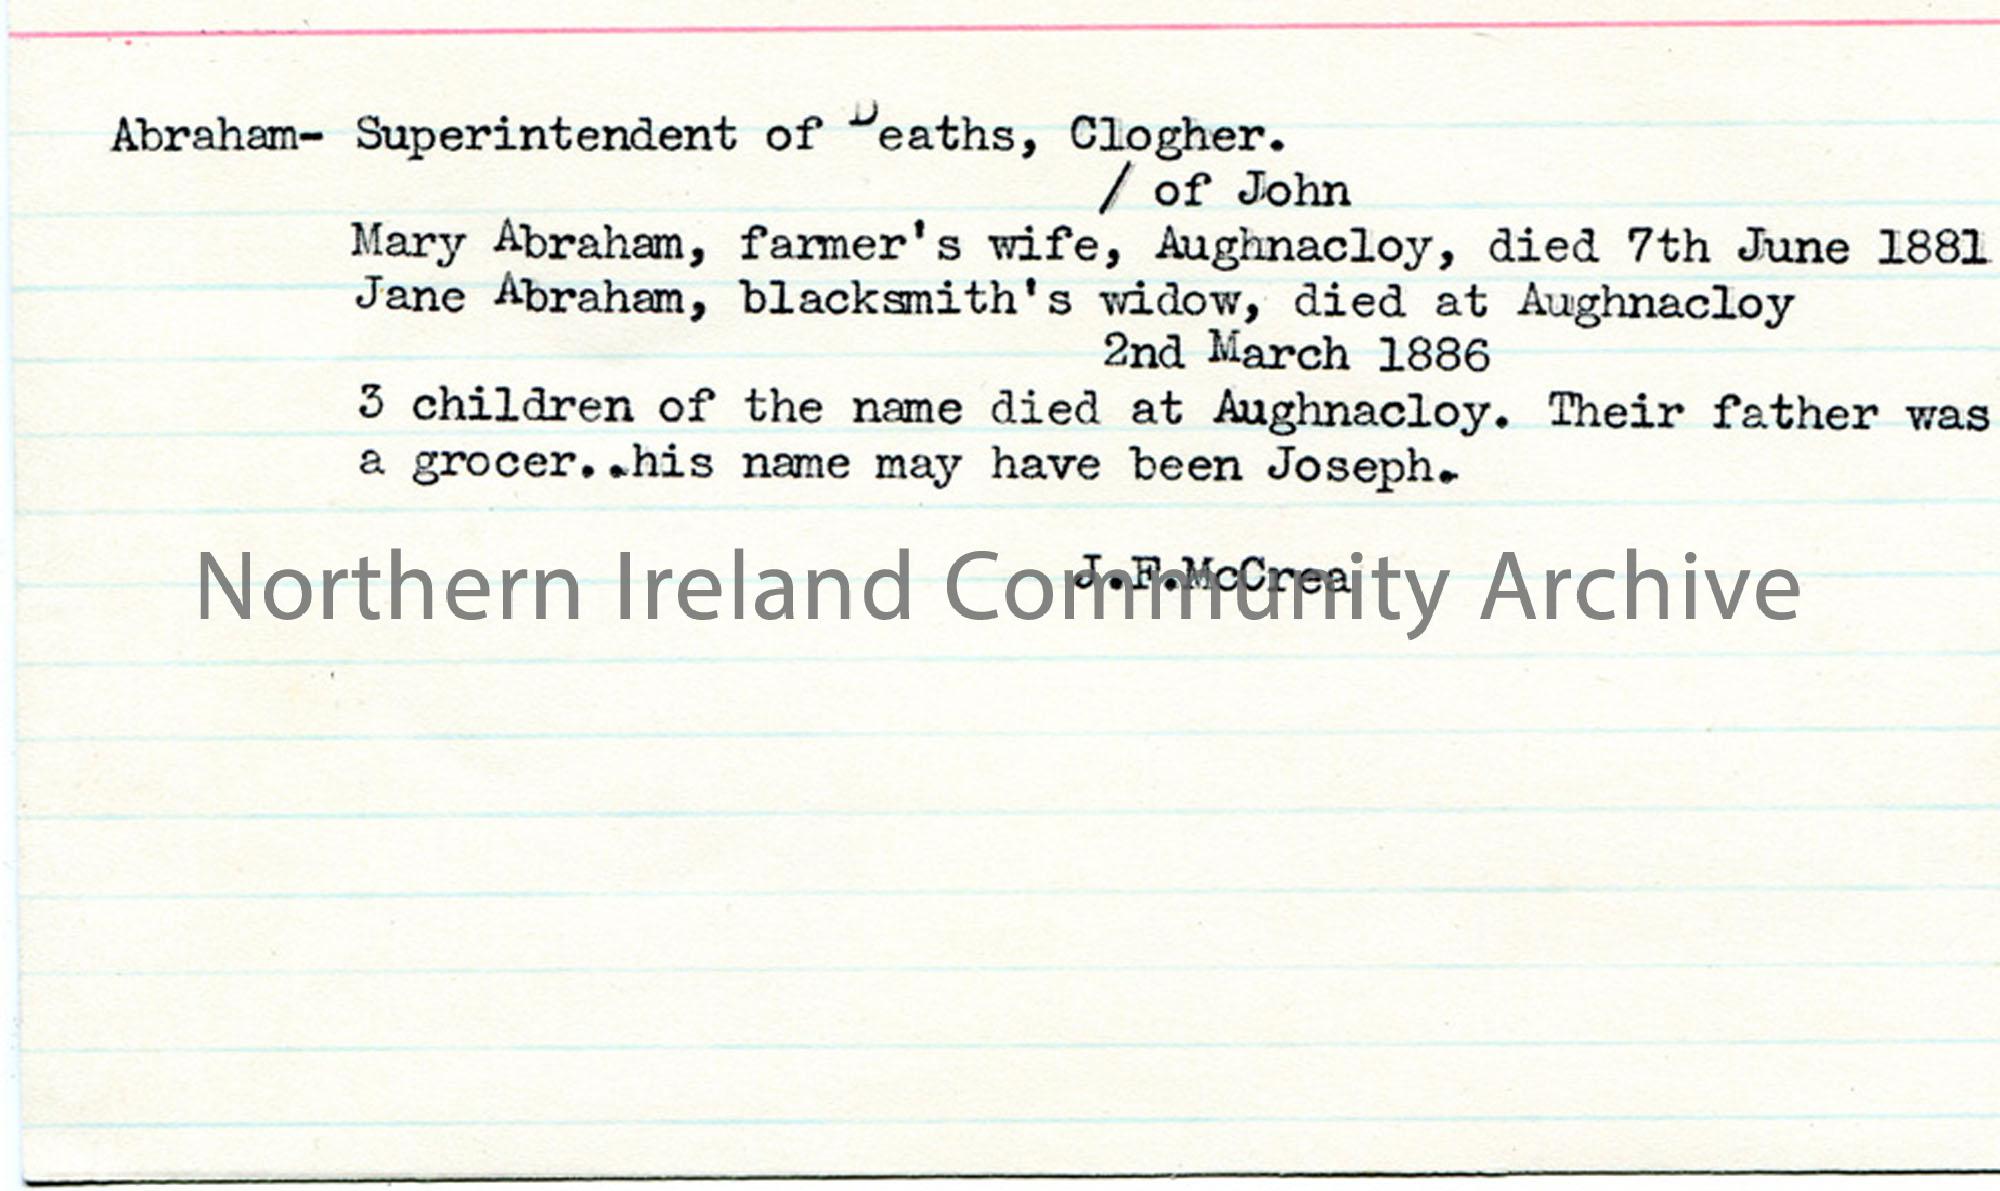 Notes re Abrahams of Aughnacloy